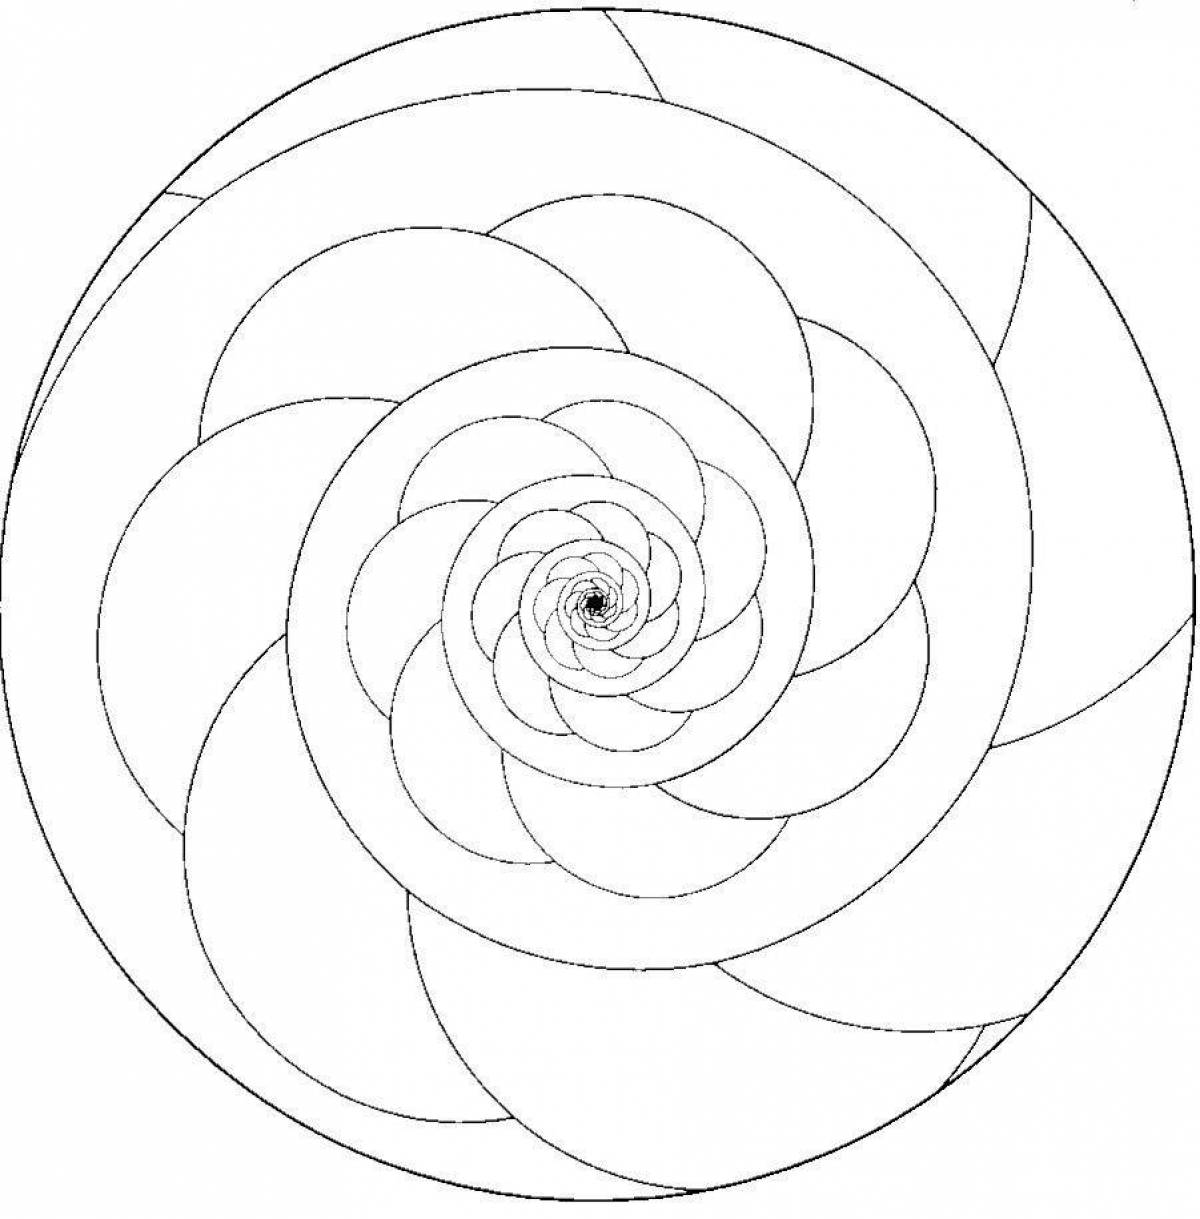 Intriguing coloring in a circle in a spiral